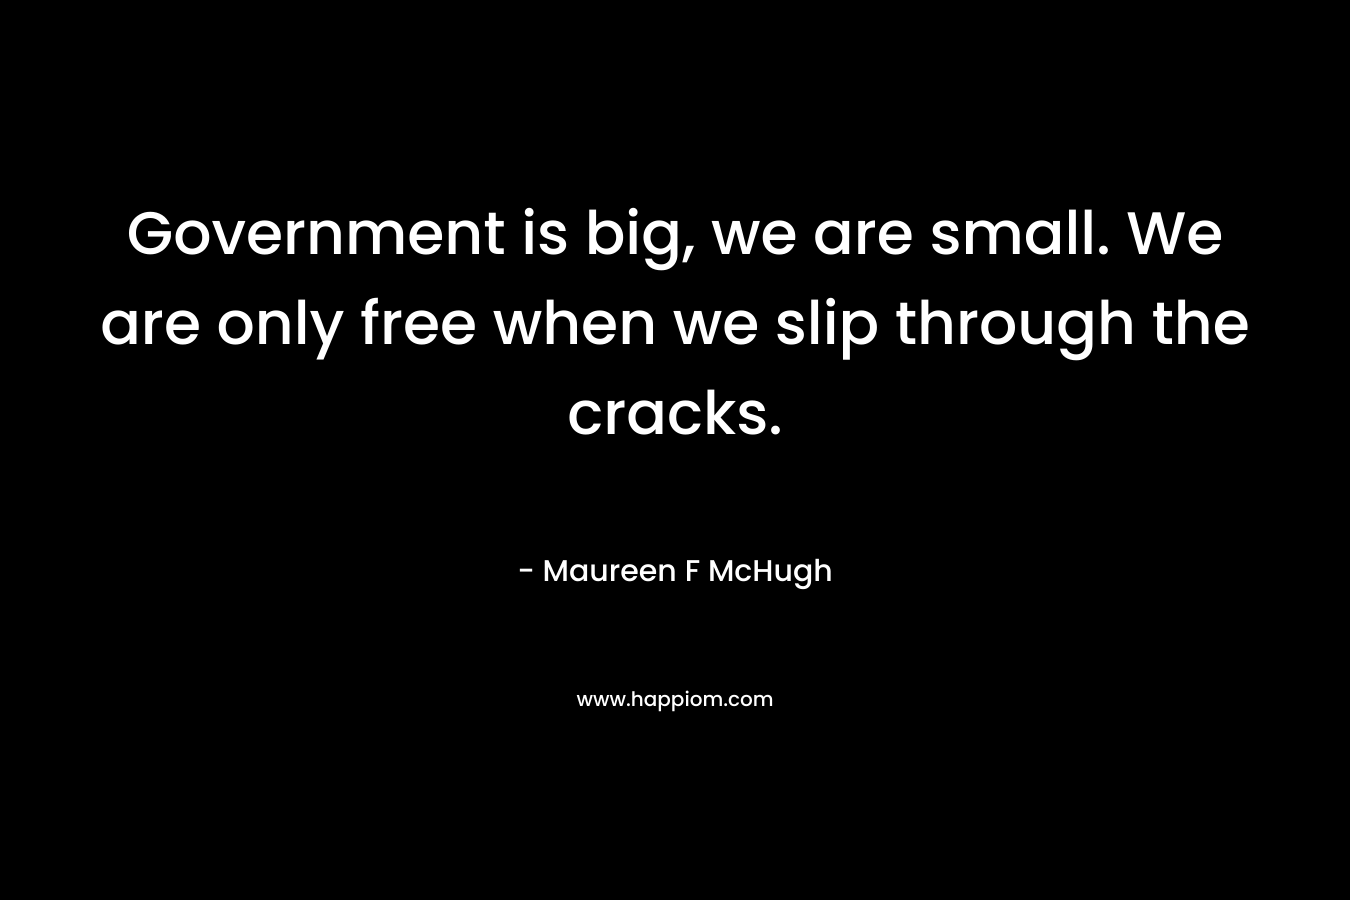 Government is big, we are small. We are only free when we slip through the cracks.